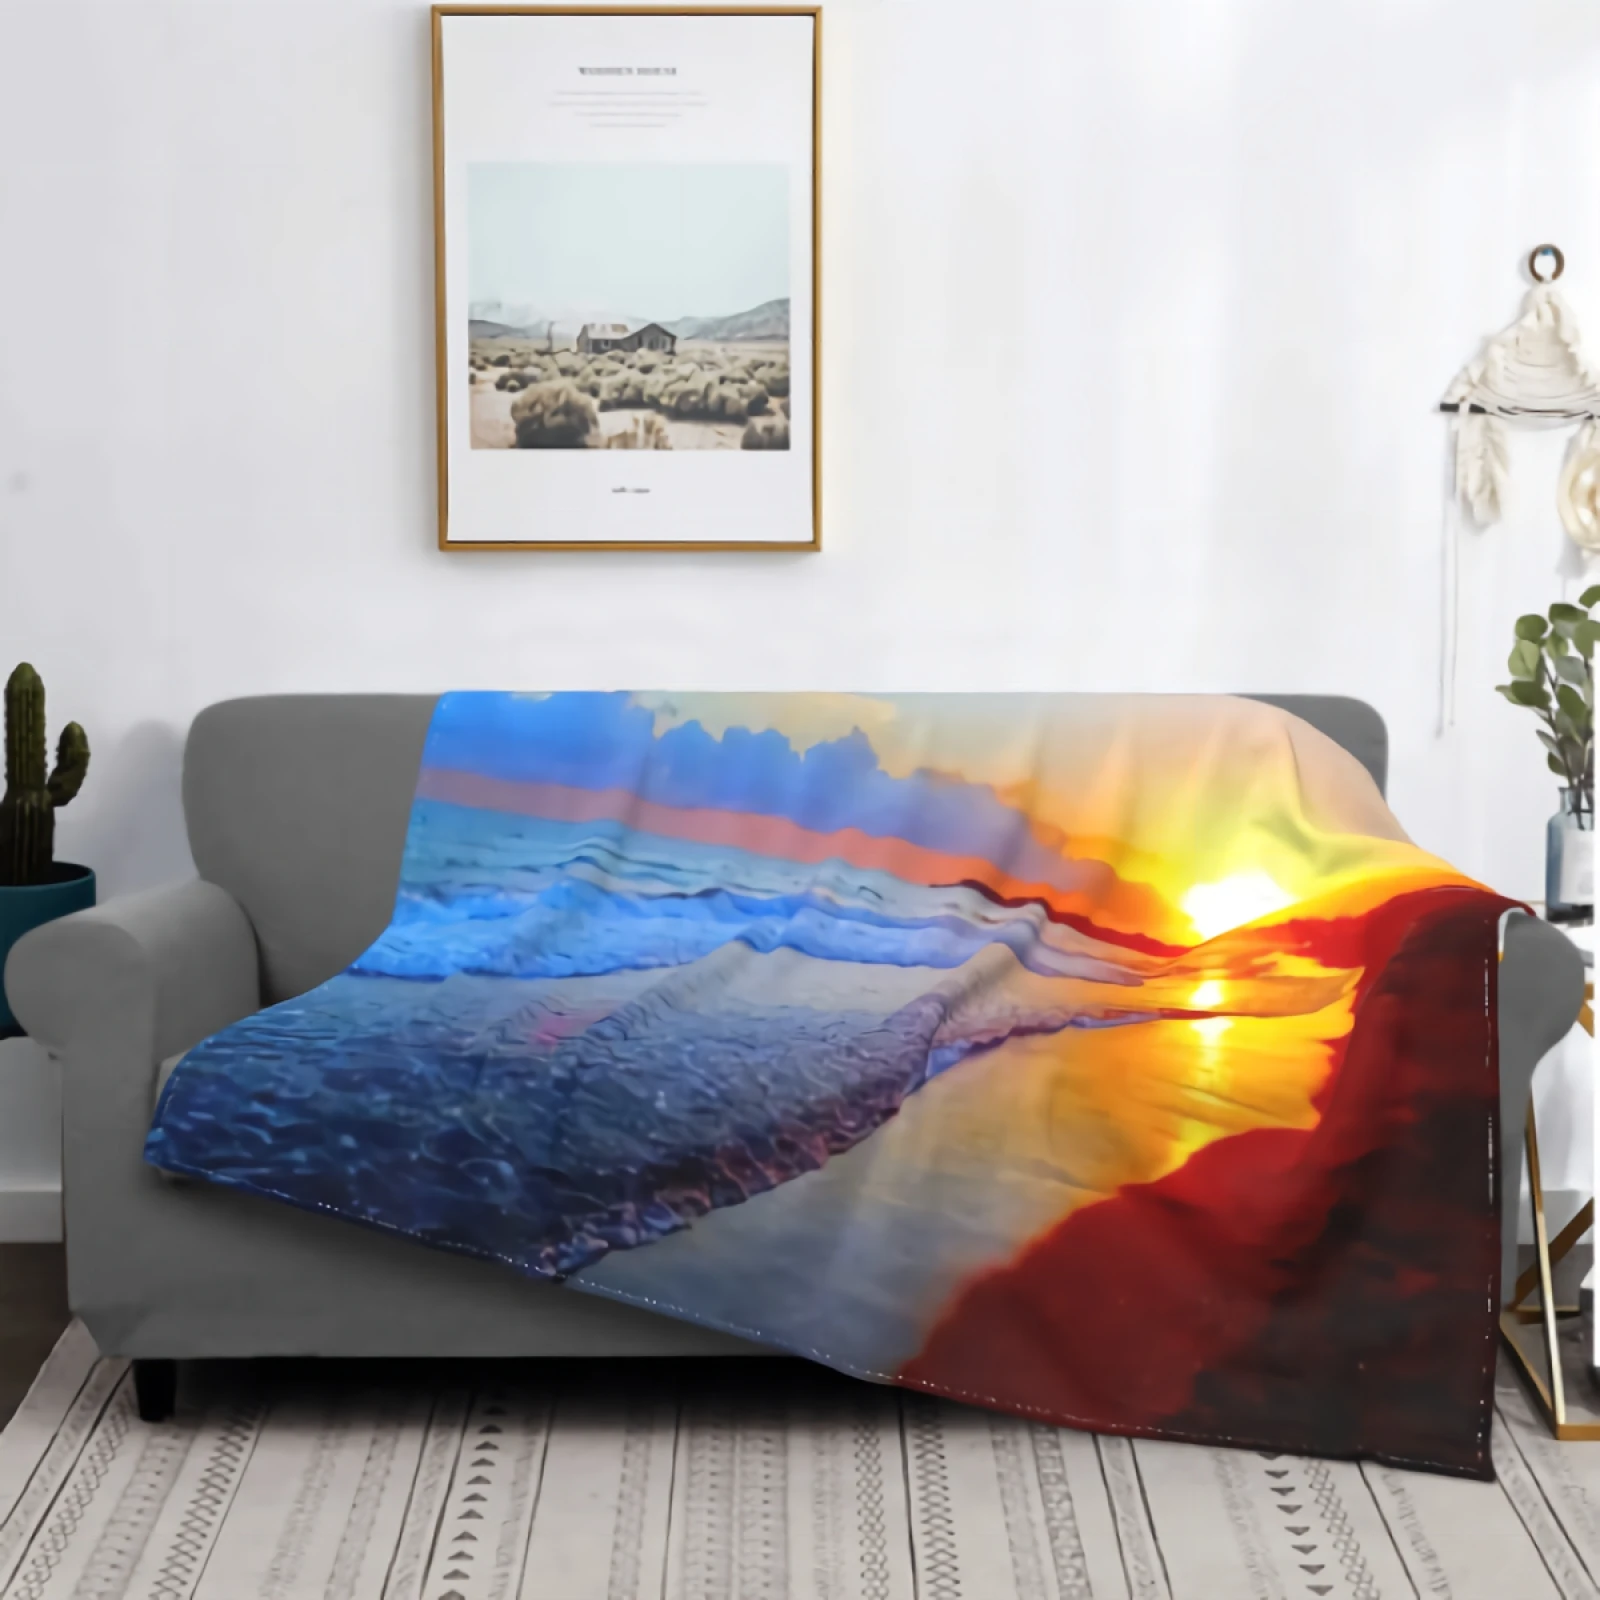 

Sunset Beach Flannel Blanket for Couch Bed Super Soft Cozy Plush Microfiber Fluffy Blanket Lightweight Warm Bedspread 80"x60"